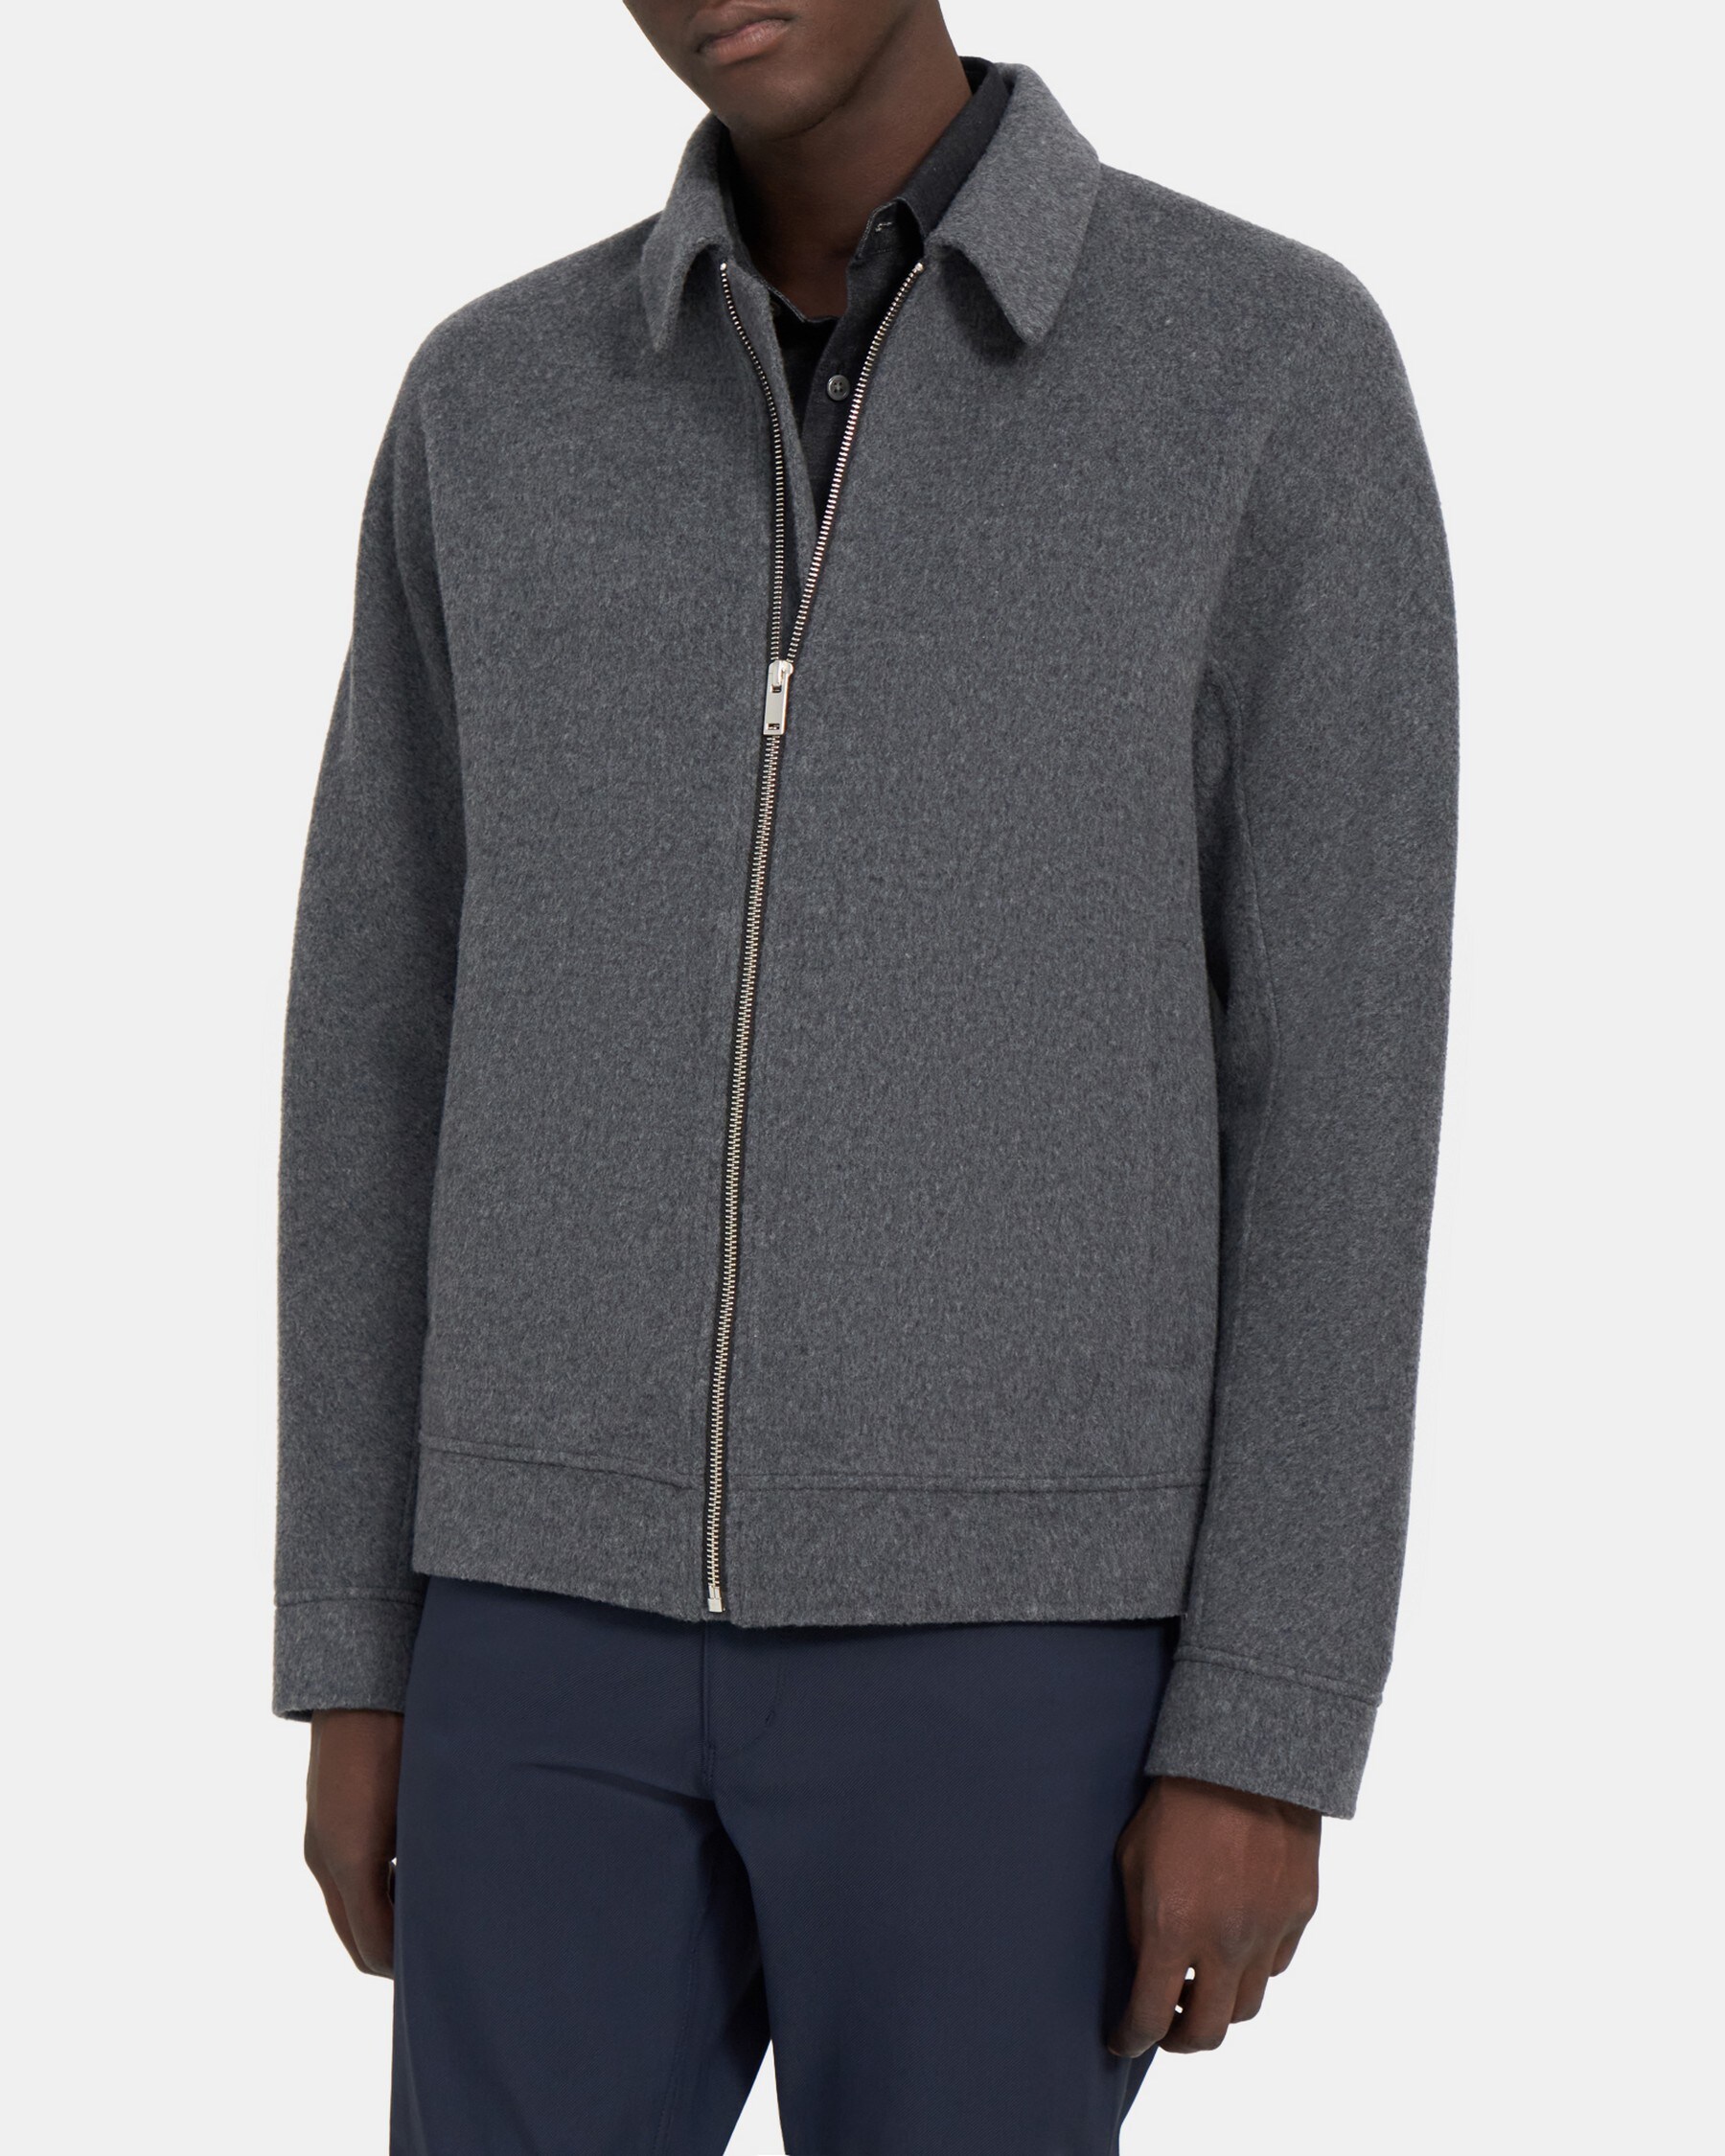 Zip-Up Jacket in Double-Face Wool-Cashmere